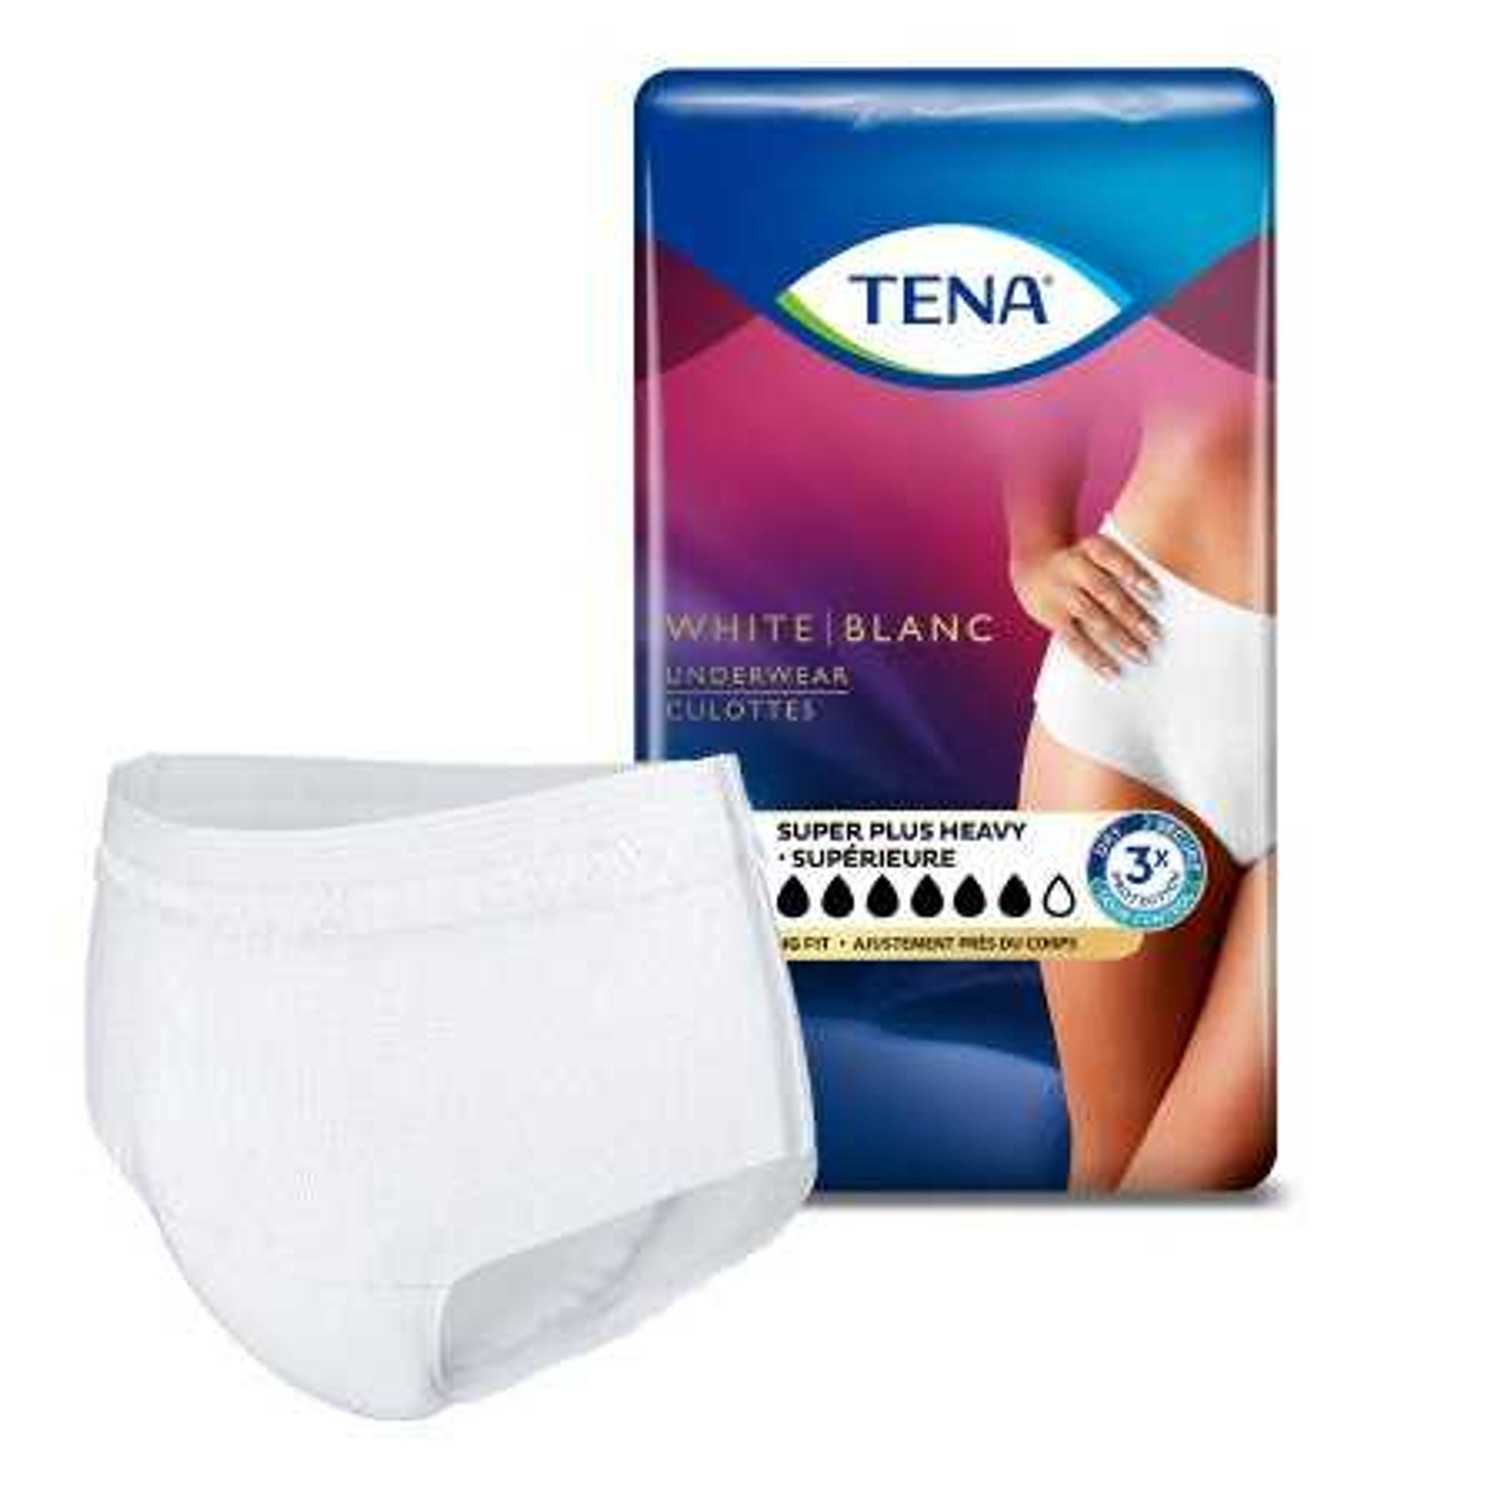 https://cdn11.bigcommerce.com/s-1l9d1d1d79/images/stencil/1500x1500/products/111022/252462/Adult-Absorbent-Underwear-TENA-Women-Pull-On-Large-Disposable-Heavy-Absorbency-54900-BG16-54900-SCA-PERSONAL-CARE-738763BG_131887__20831.1682461808.jpg?c=2